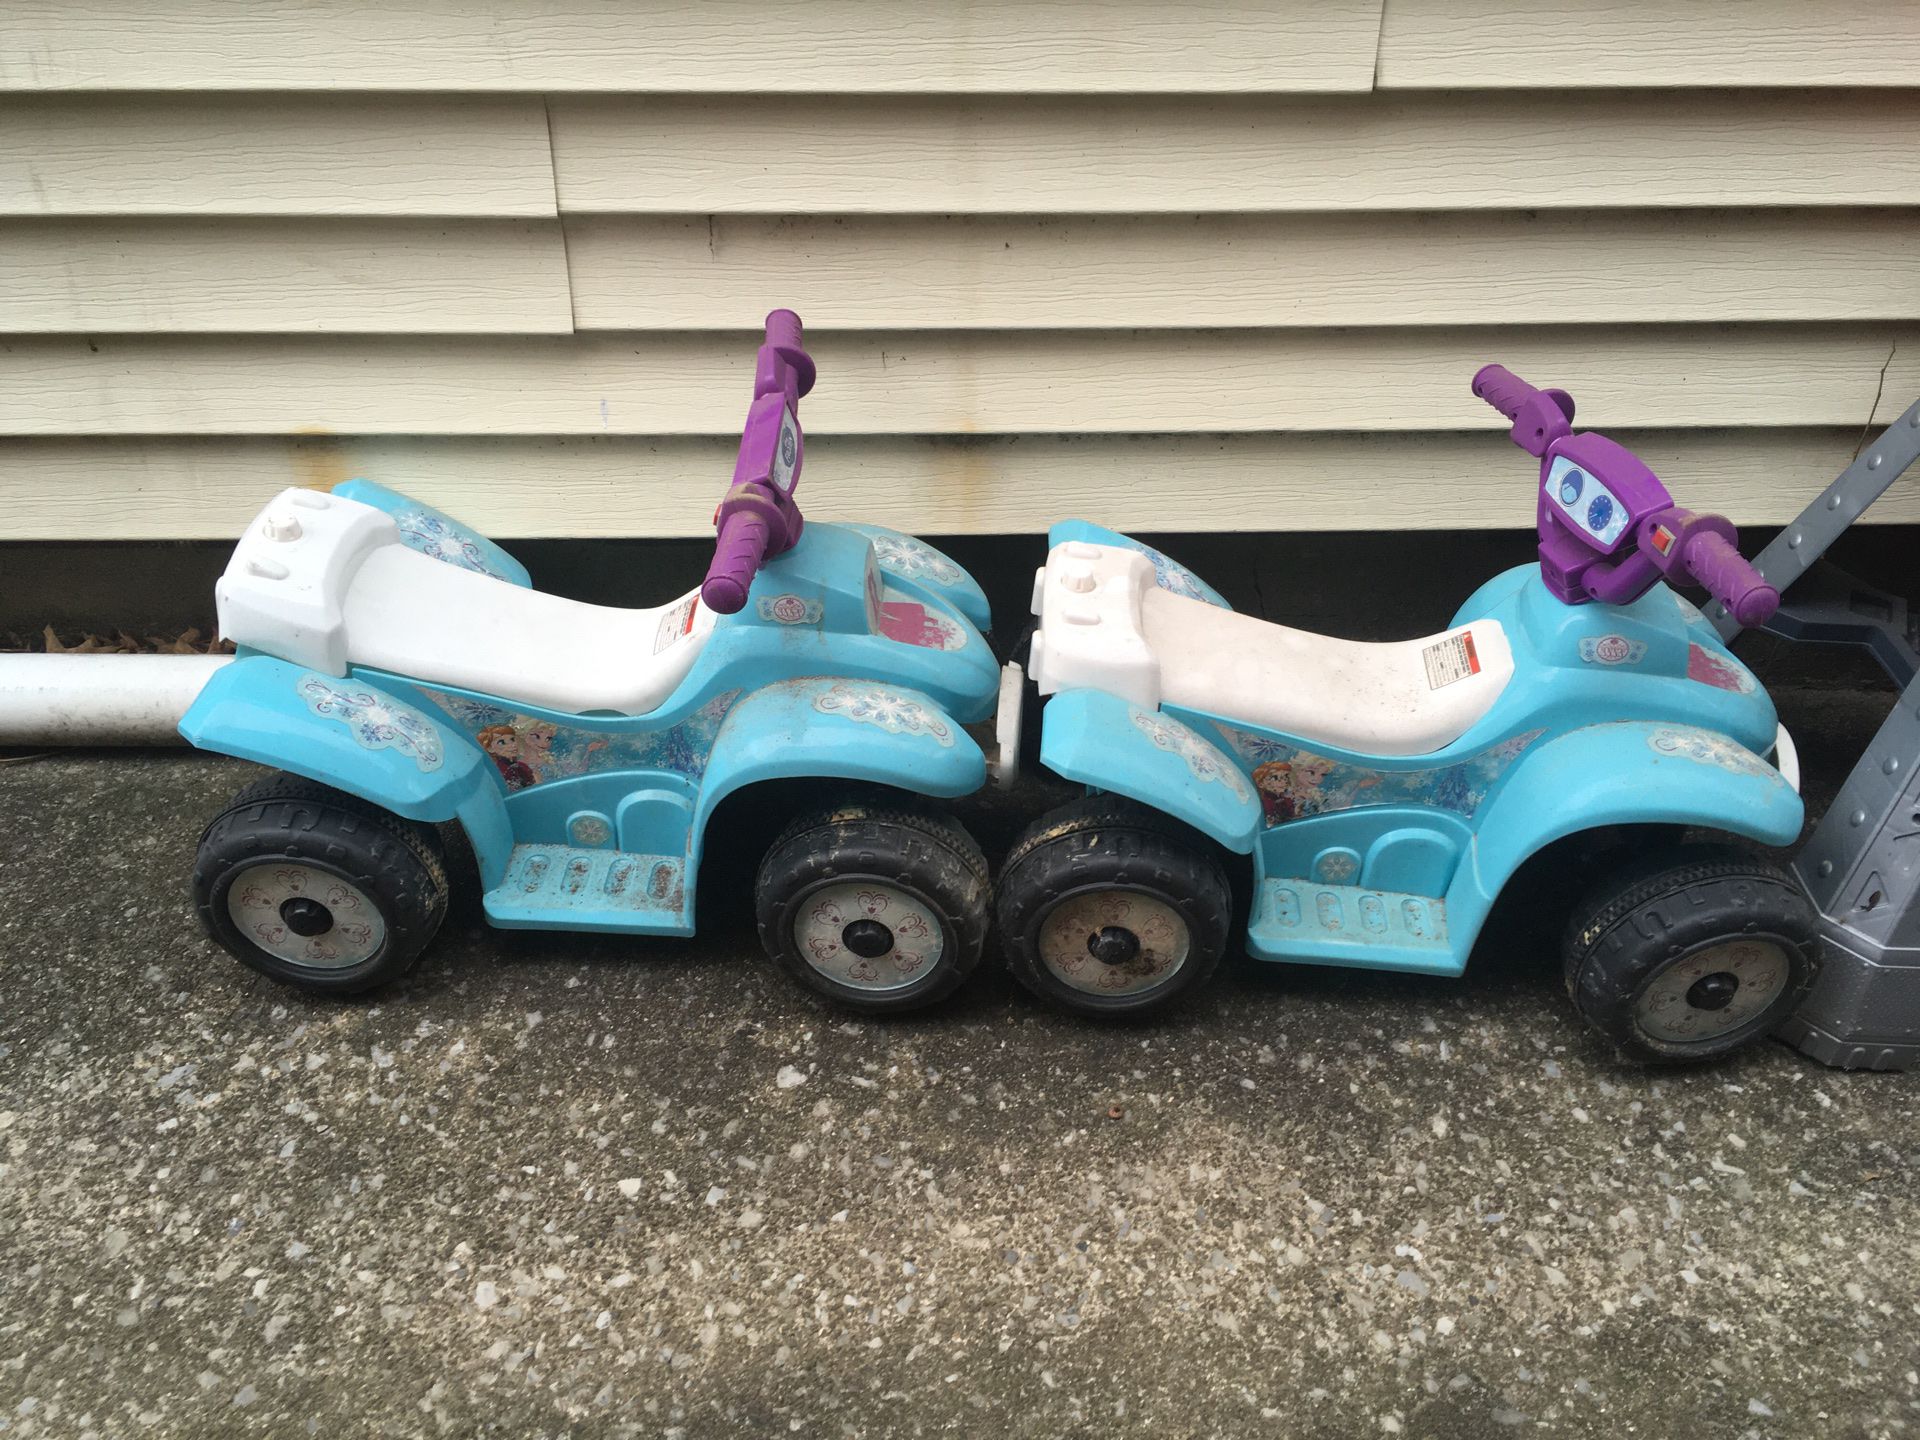 2 Frozen power wheels charger not included